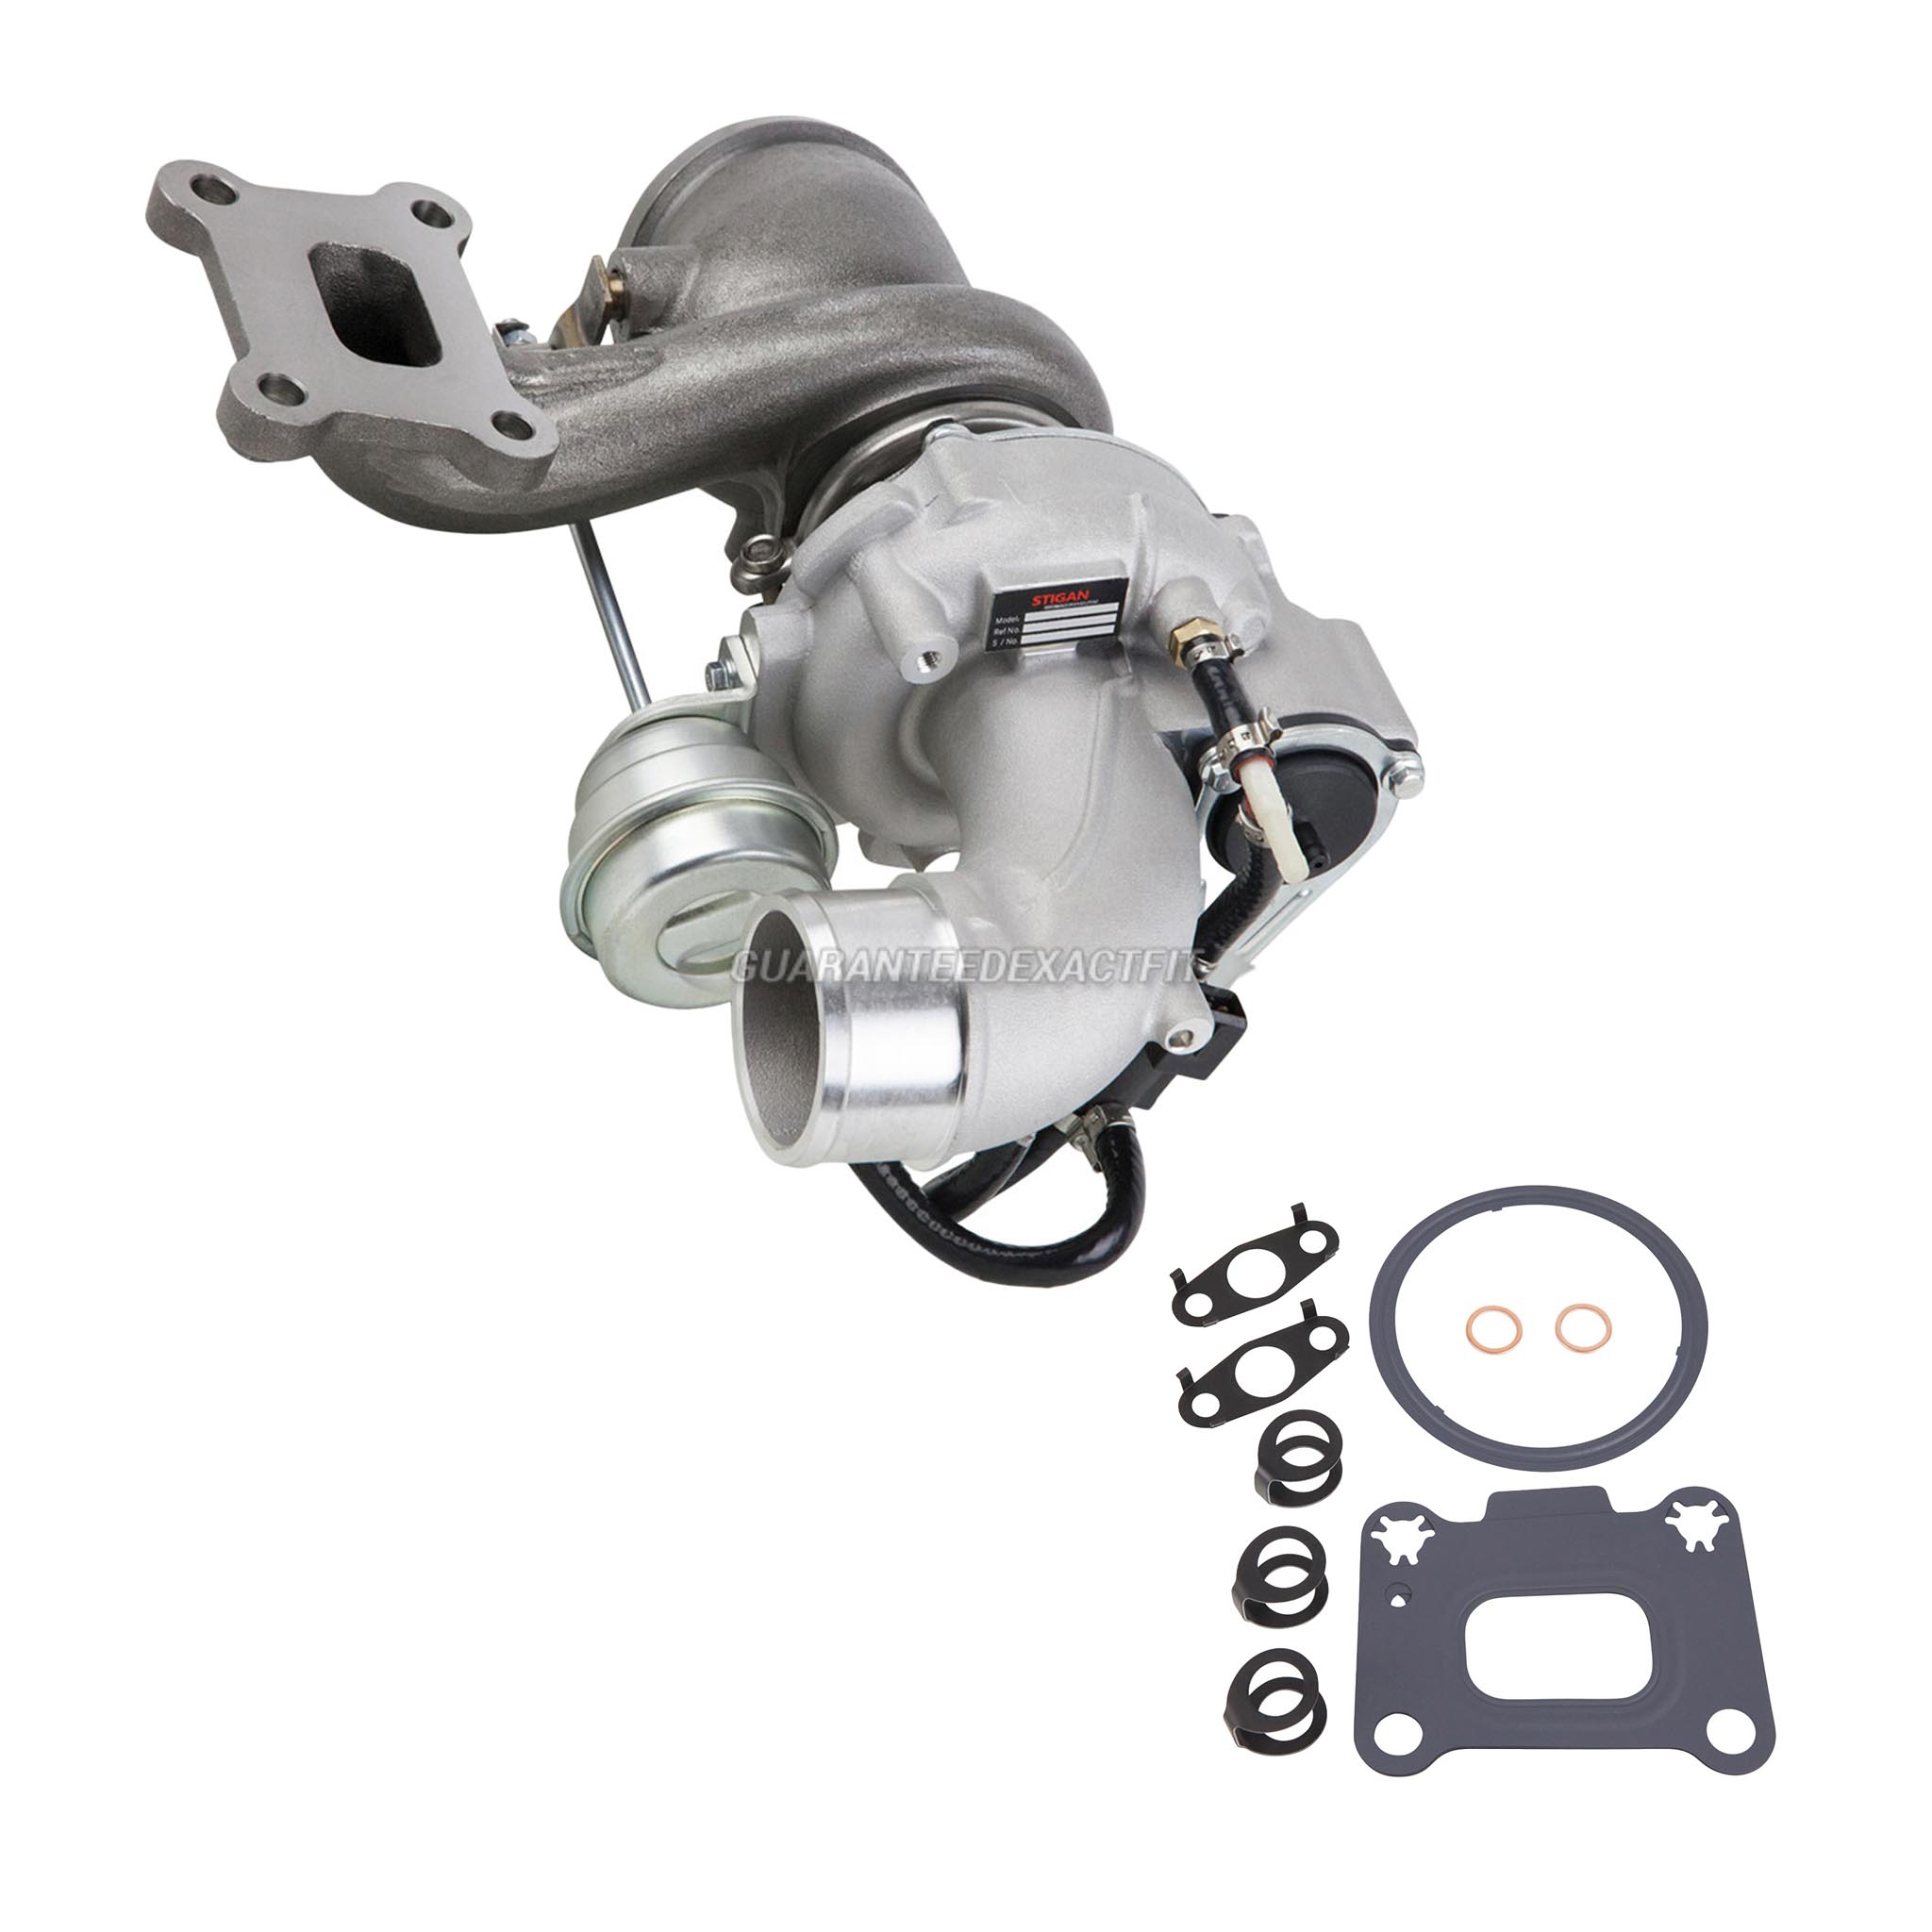 2015 Lincoln Mkc turbocharger and installation accessory kit 